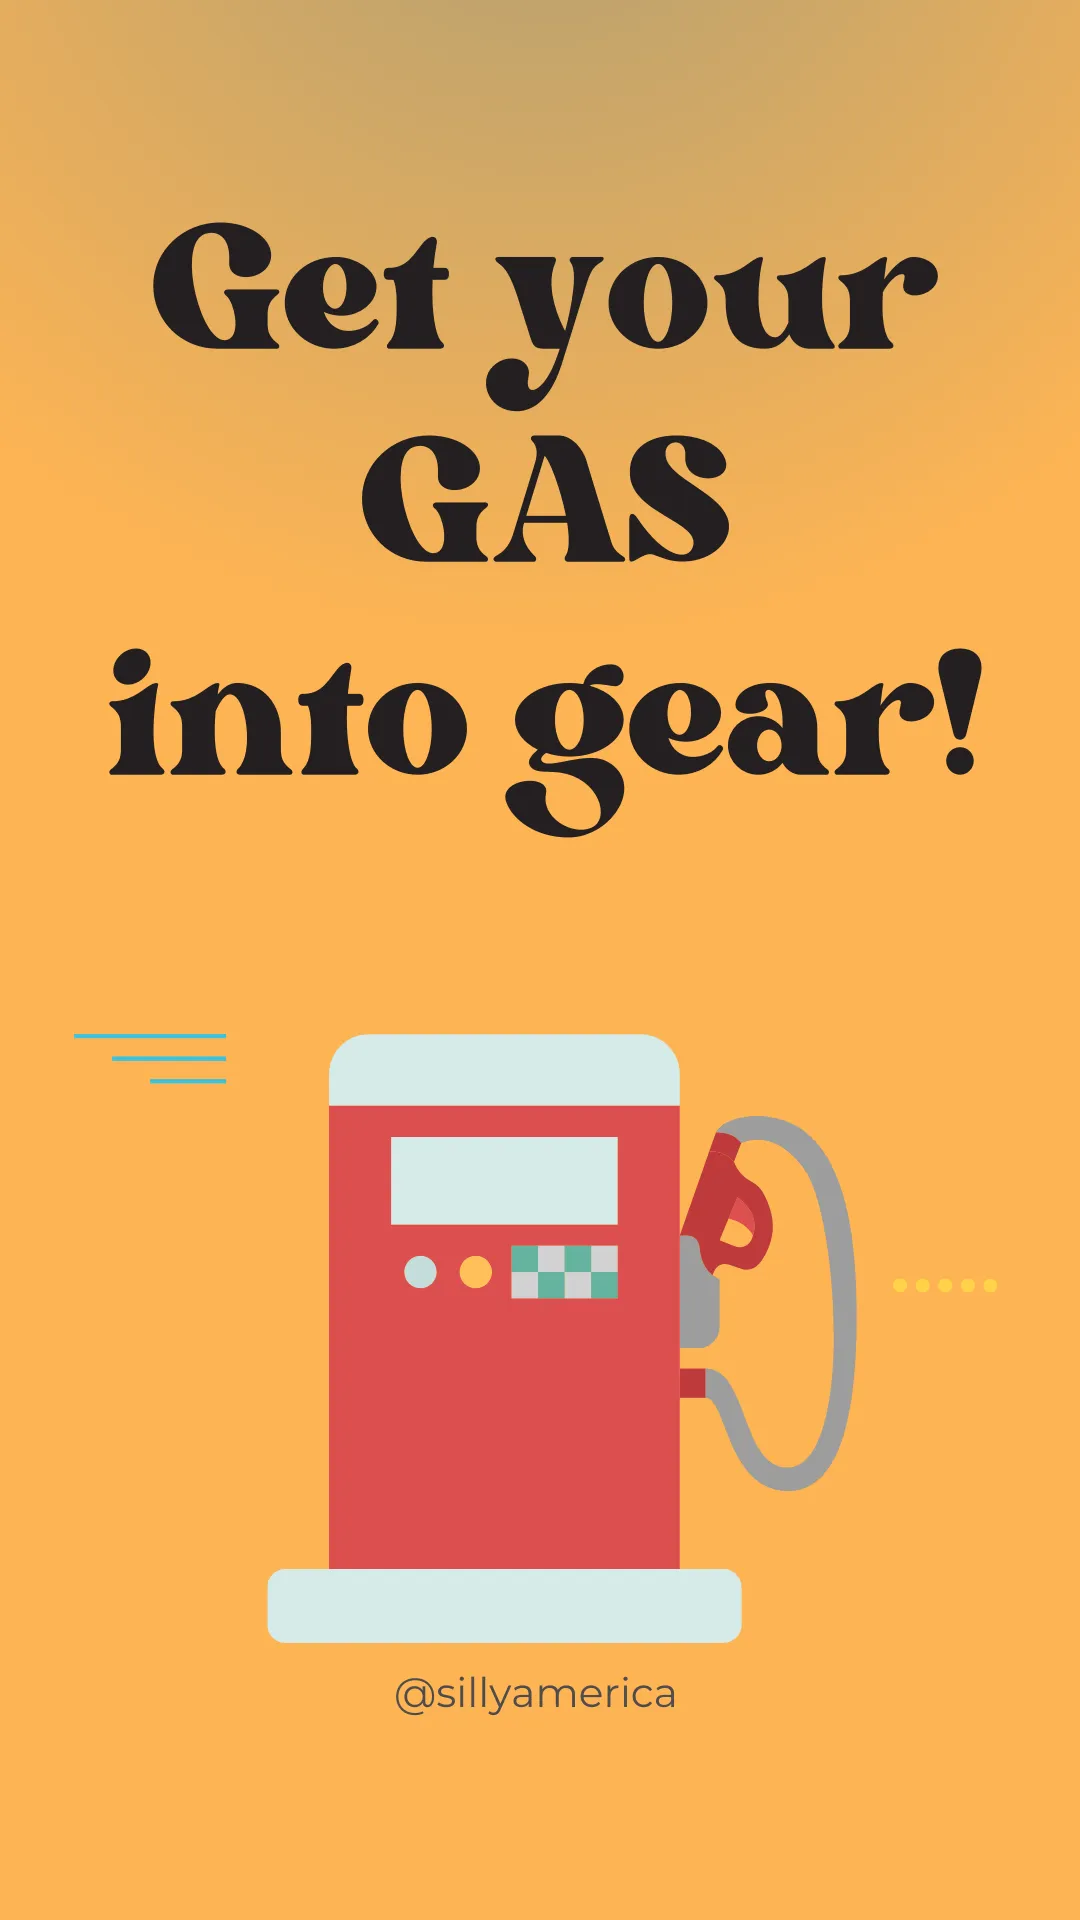 Get your GAS into gear! - Road Trip Puns